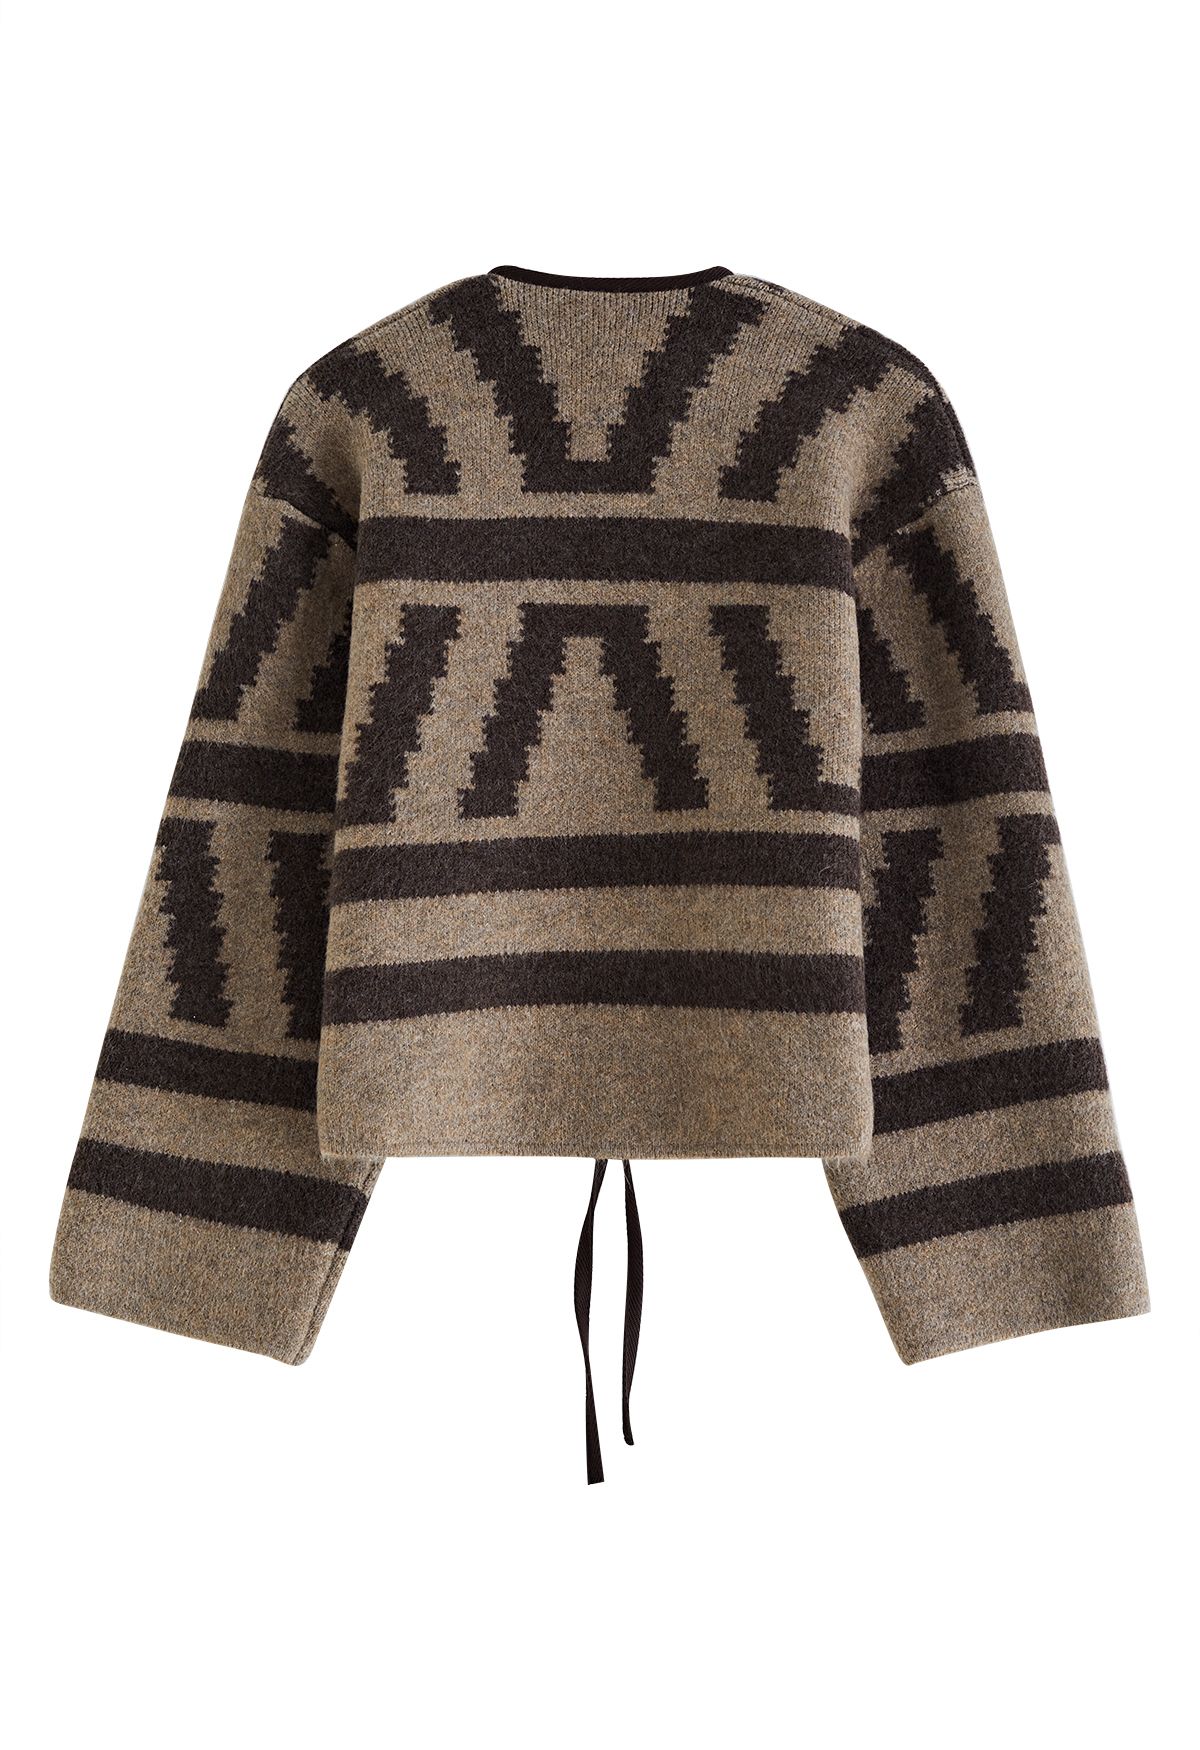 Tie-String Open Front Striped Knit Cardigan in Brown